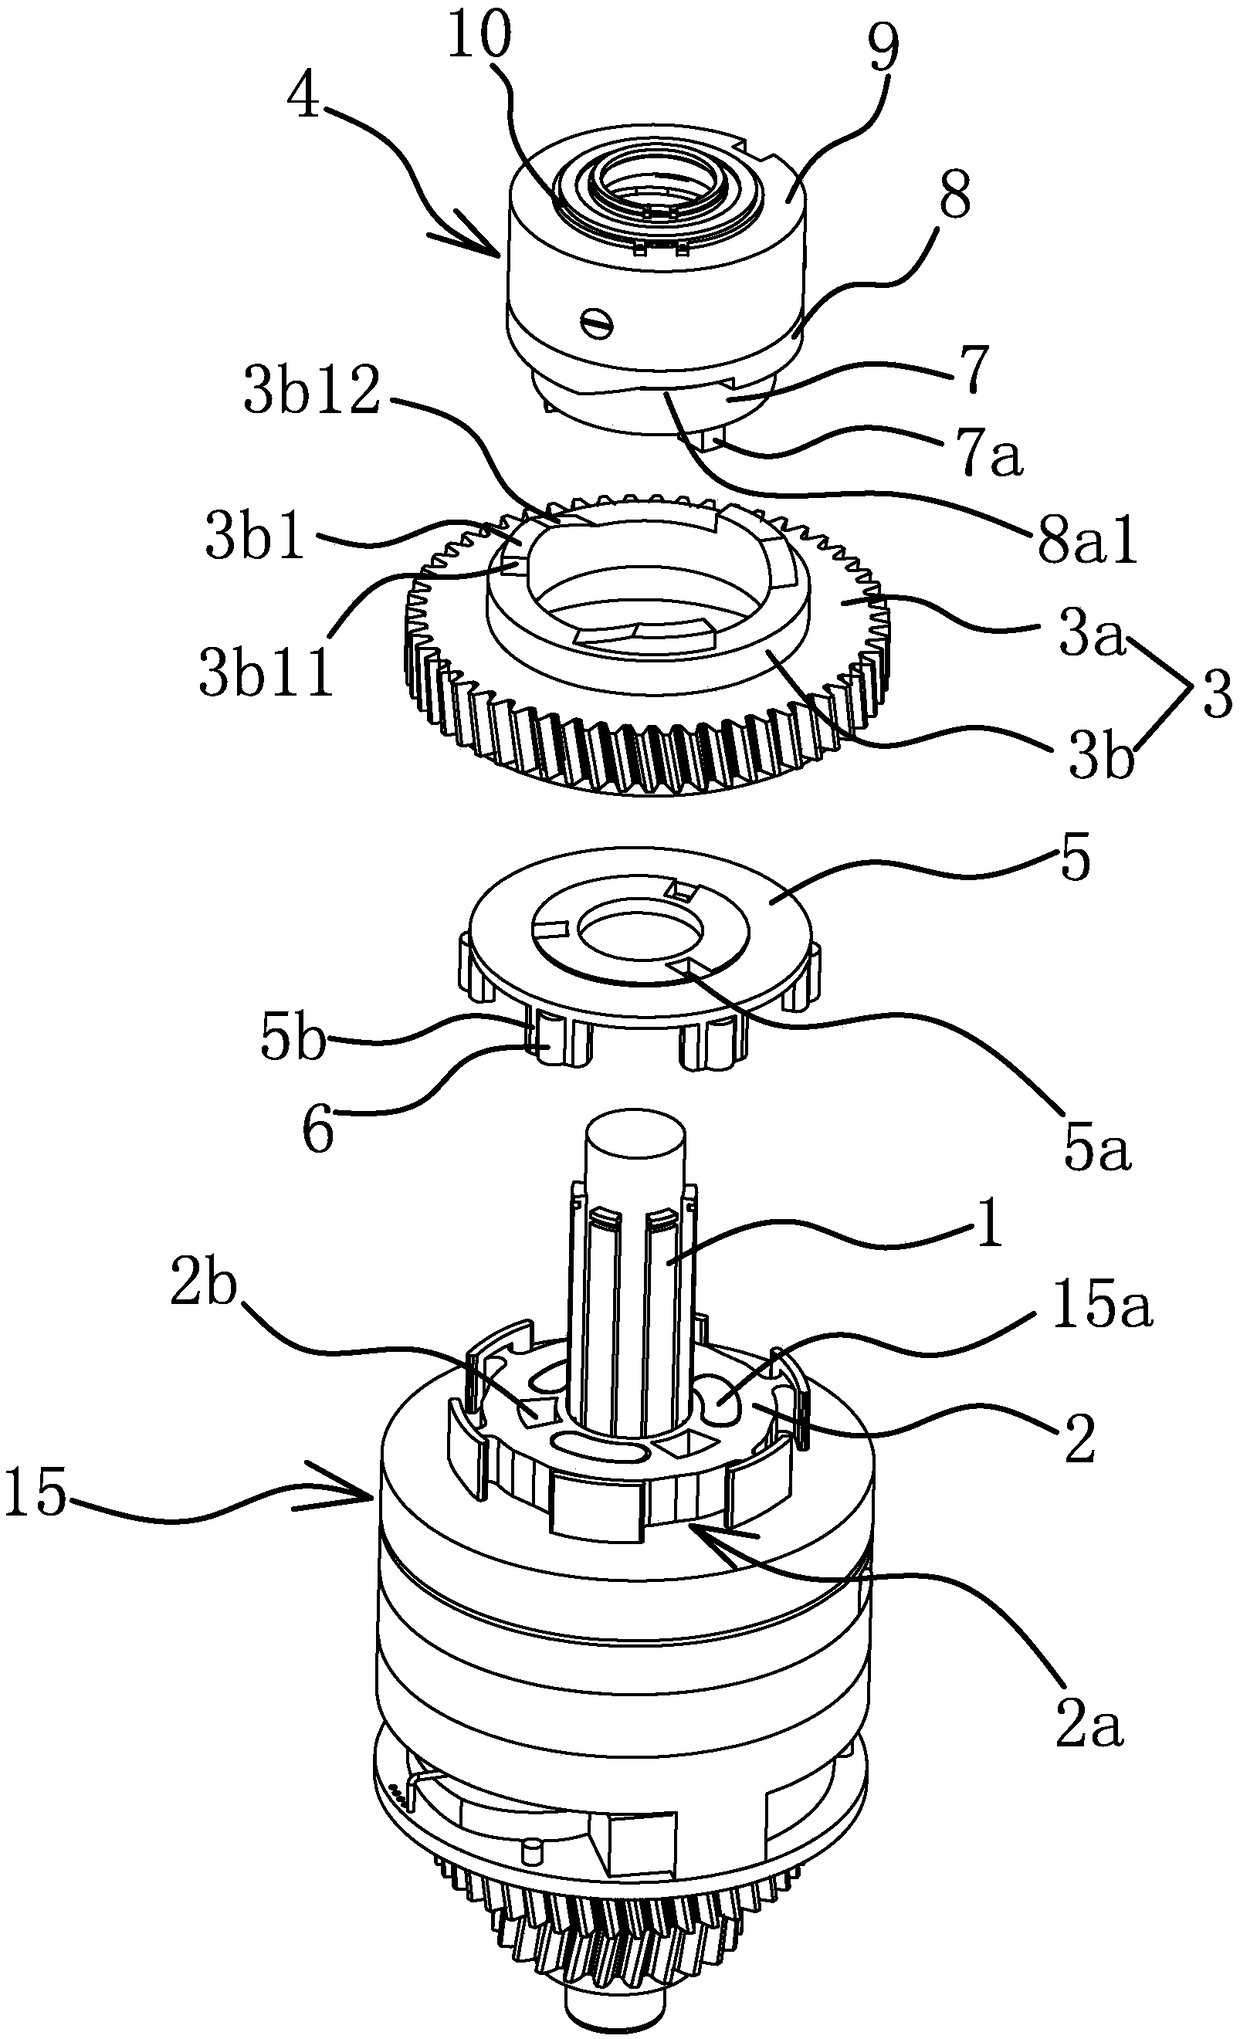 Transmission mechanism of bidirectional automatic gearbox